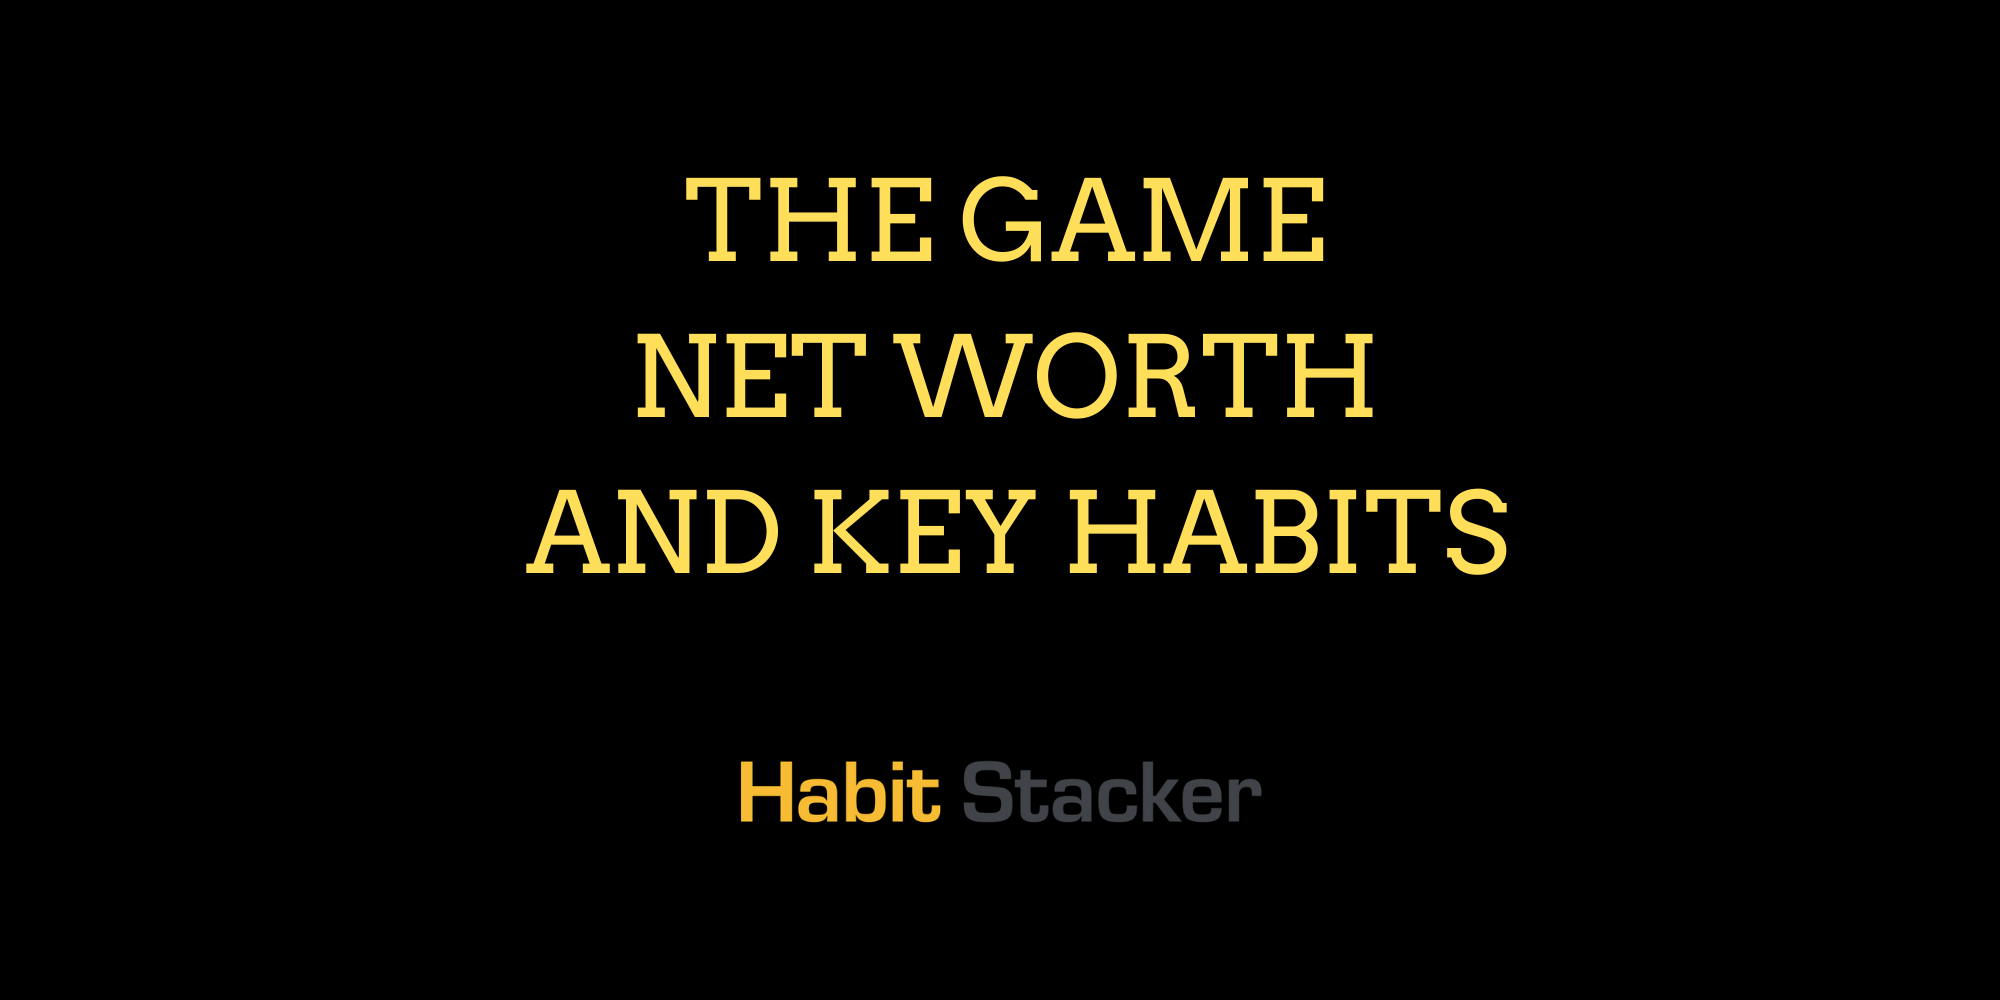 The Game Net Worth and Key Habits